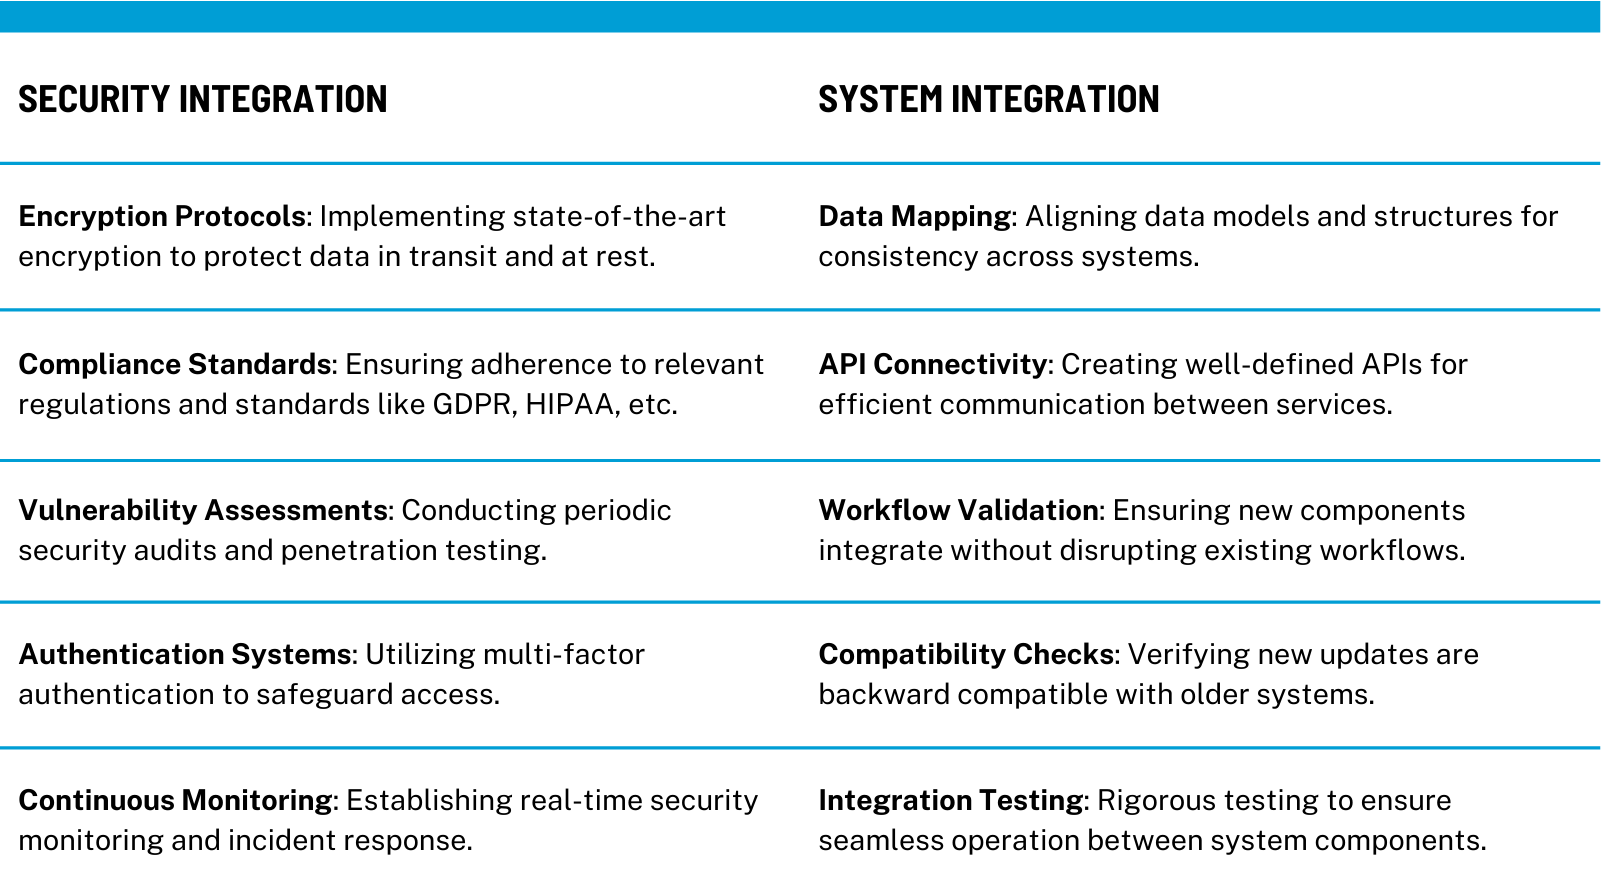 A comparative visual representation highlighting the essential elements of Security Integration and System Integration in software modernization, including Encryption Protocols, Compliance Standards, Vulnerability Assessments, Authentication Systems, Continuous Monitoring on one side, and Data Mapping, API Connectivity, Workflow Validation, Compatibility Checks, Integration Testing on the other.